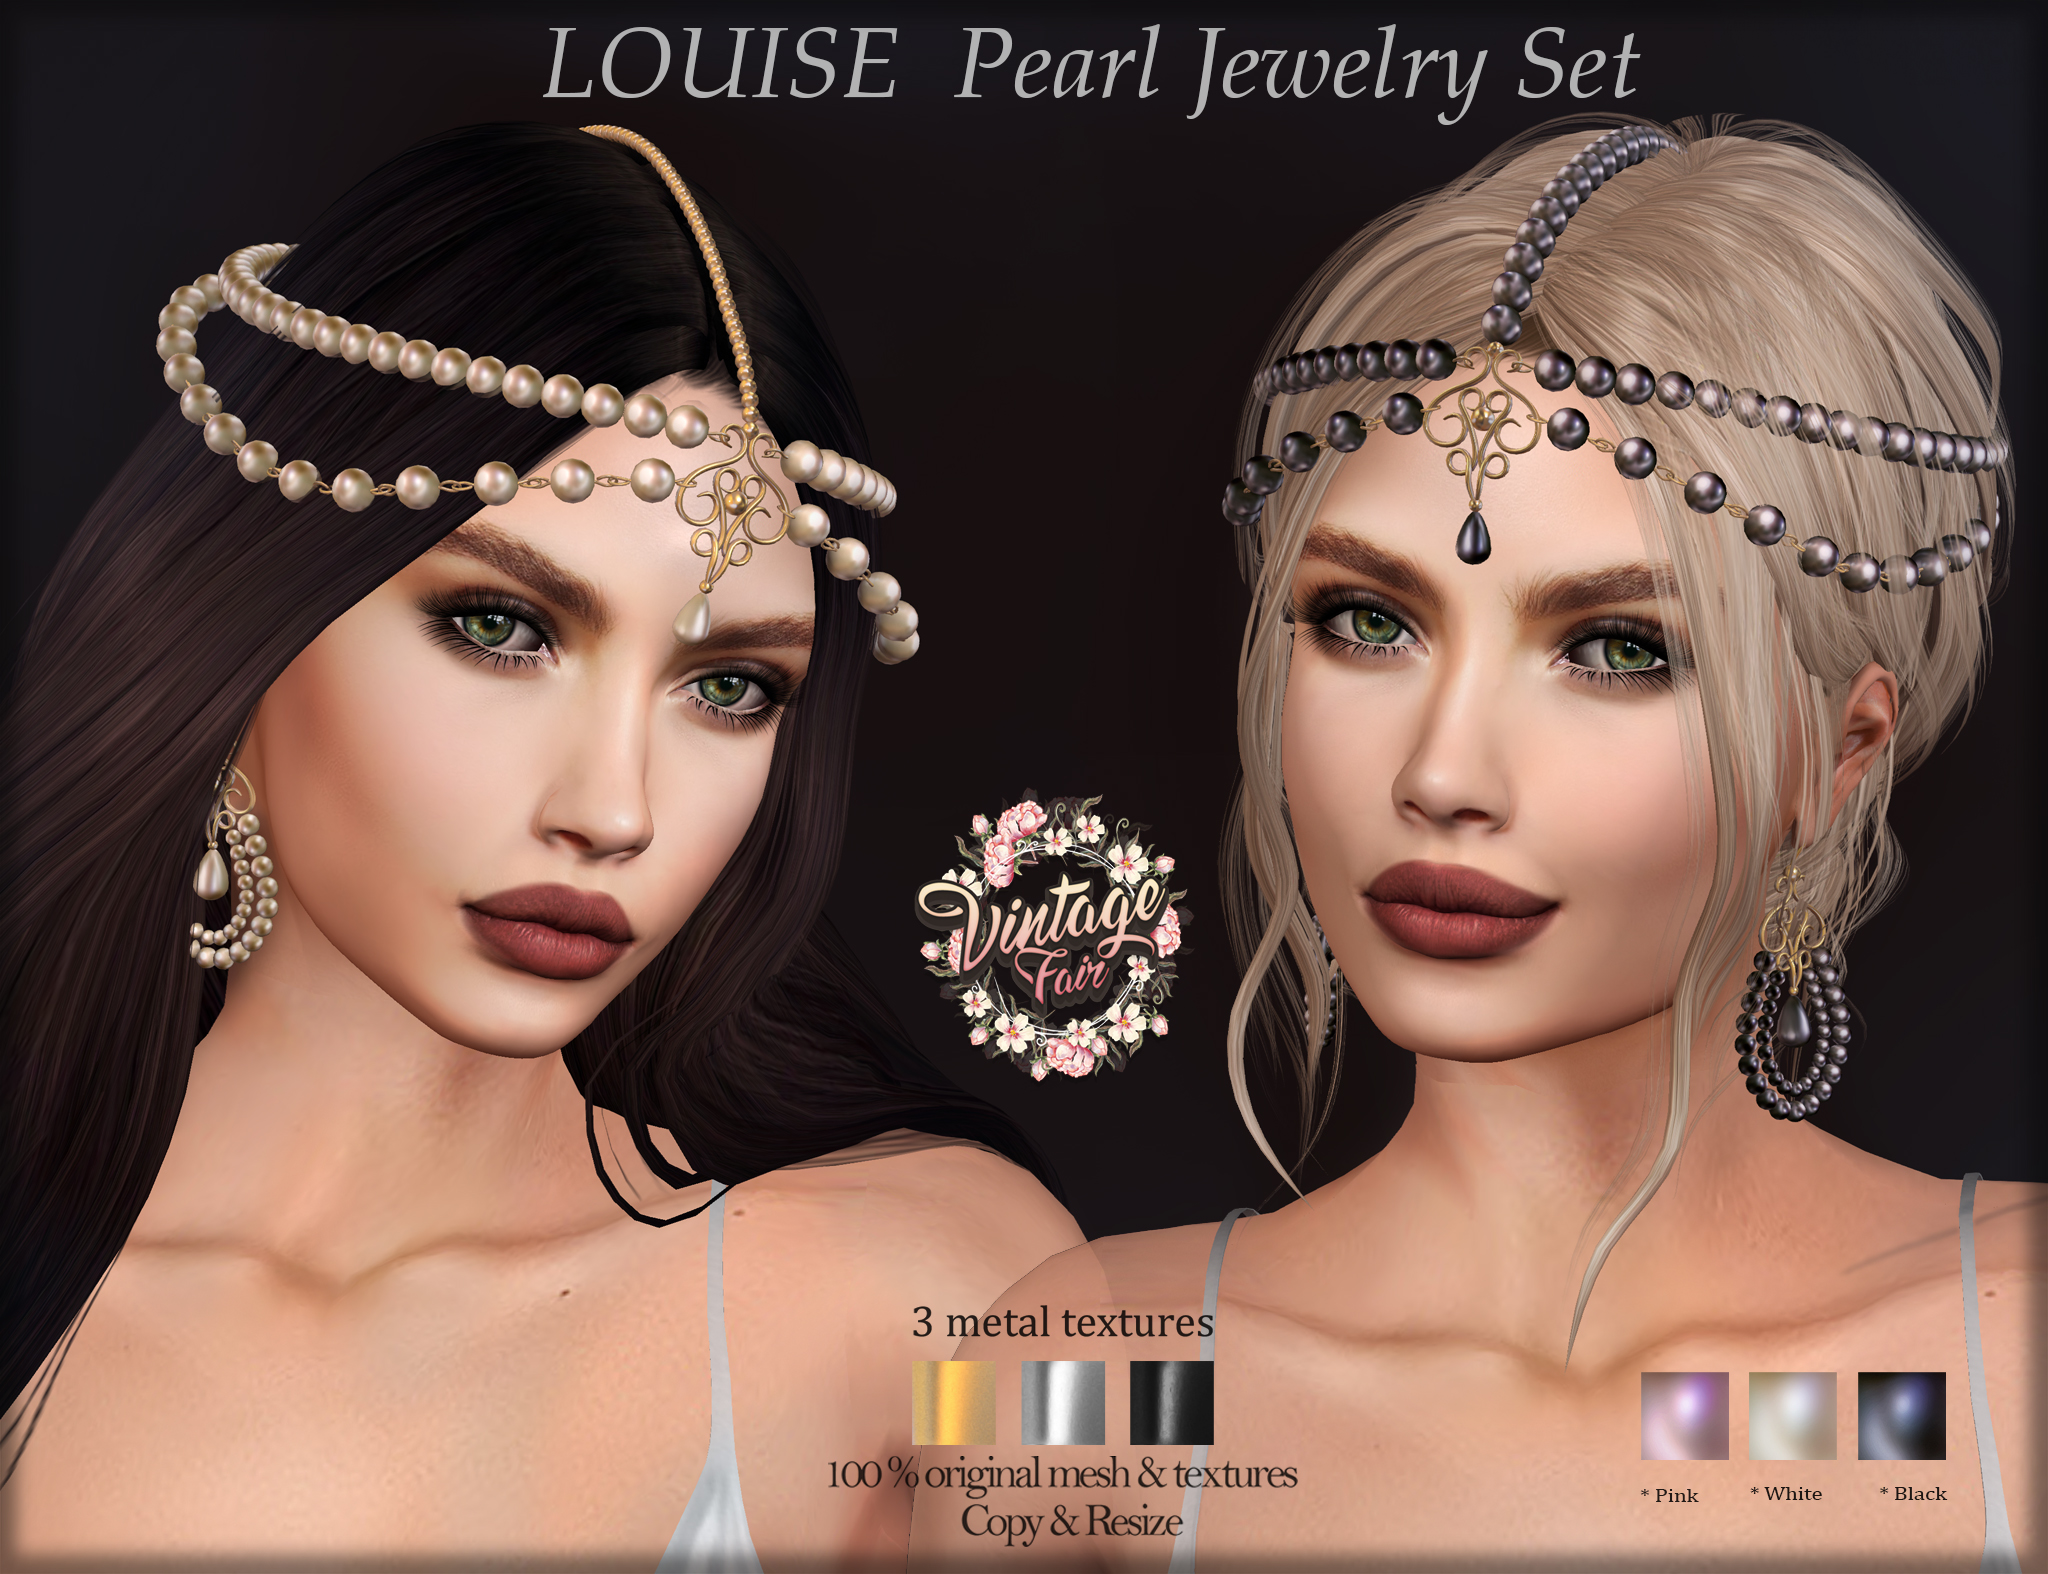 LOUISE Pearl Jewelry Set